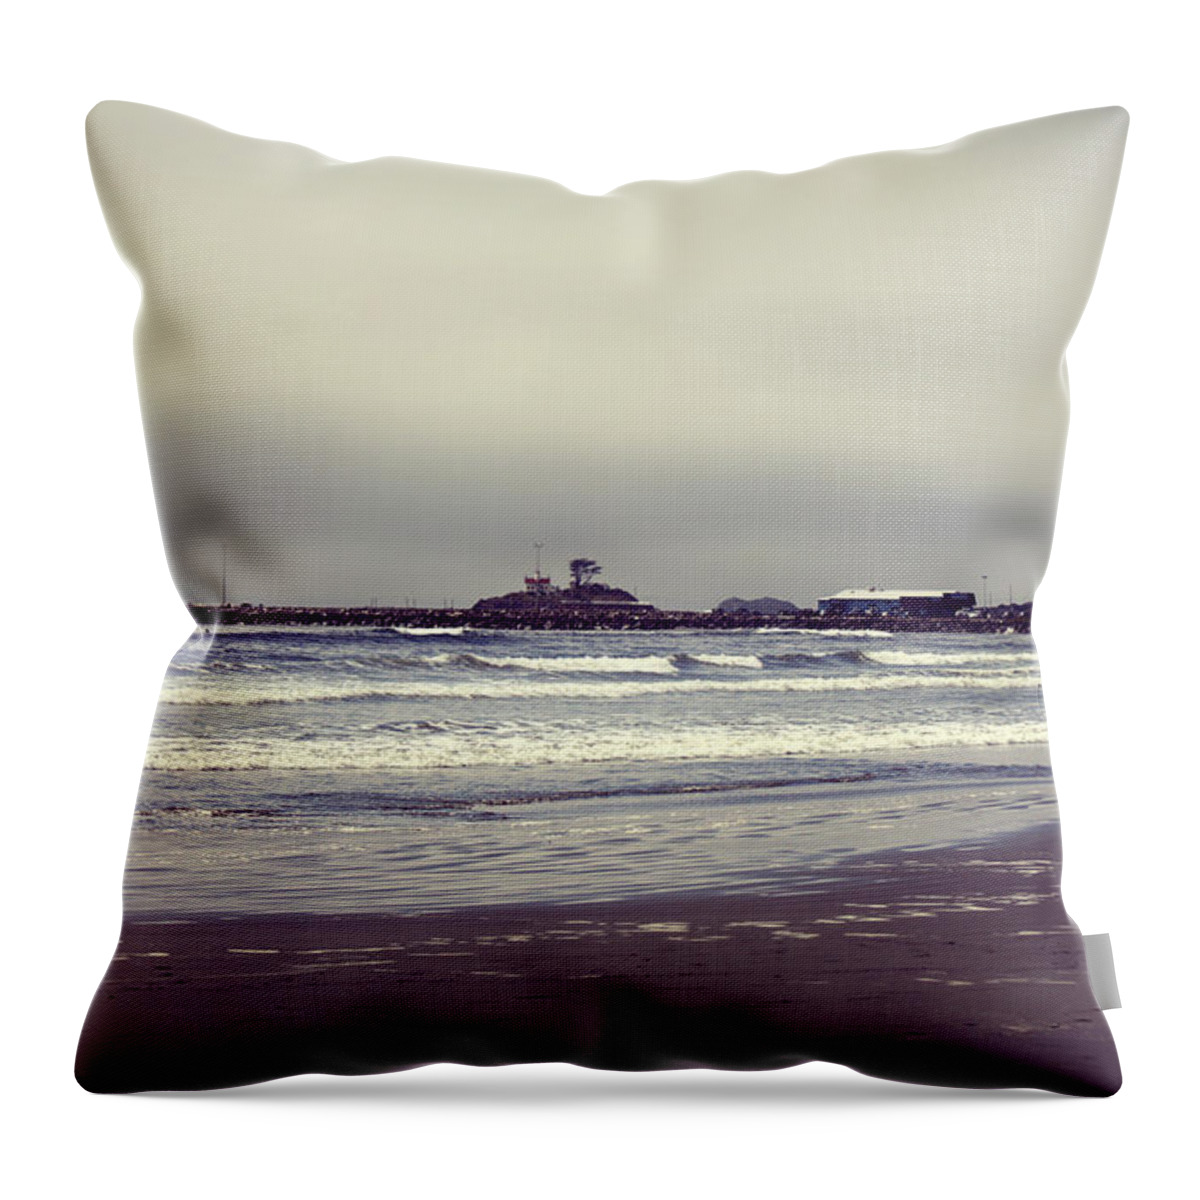 Lighthouse Throw Pillow featuring the photograph Storm Approaching by Melanie Lankford Photography